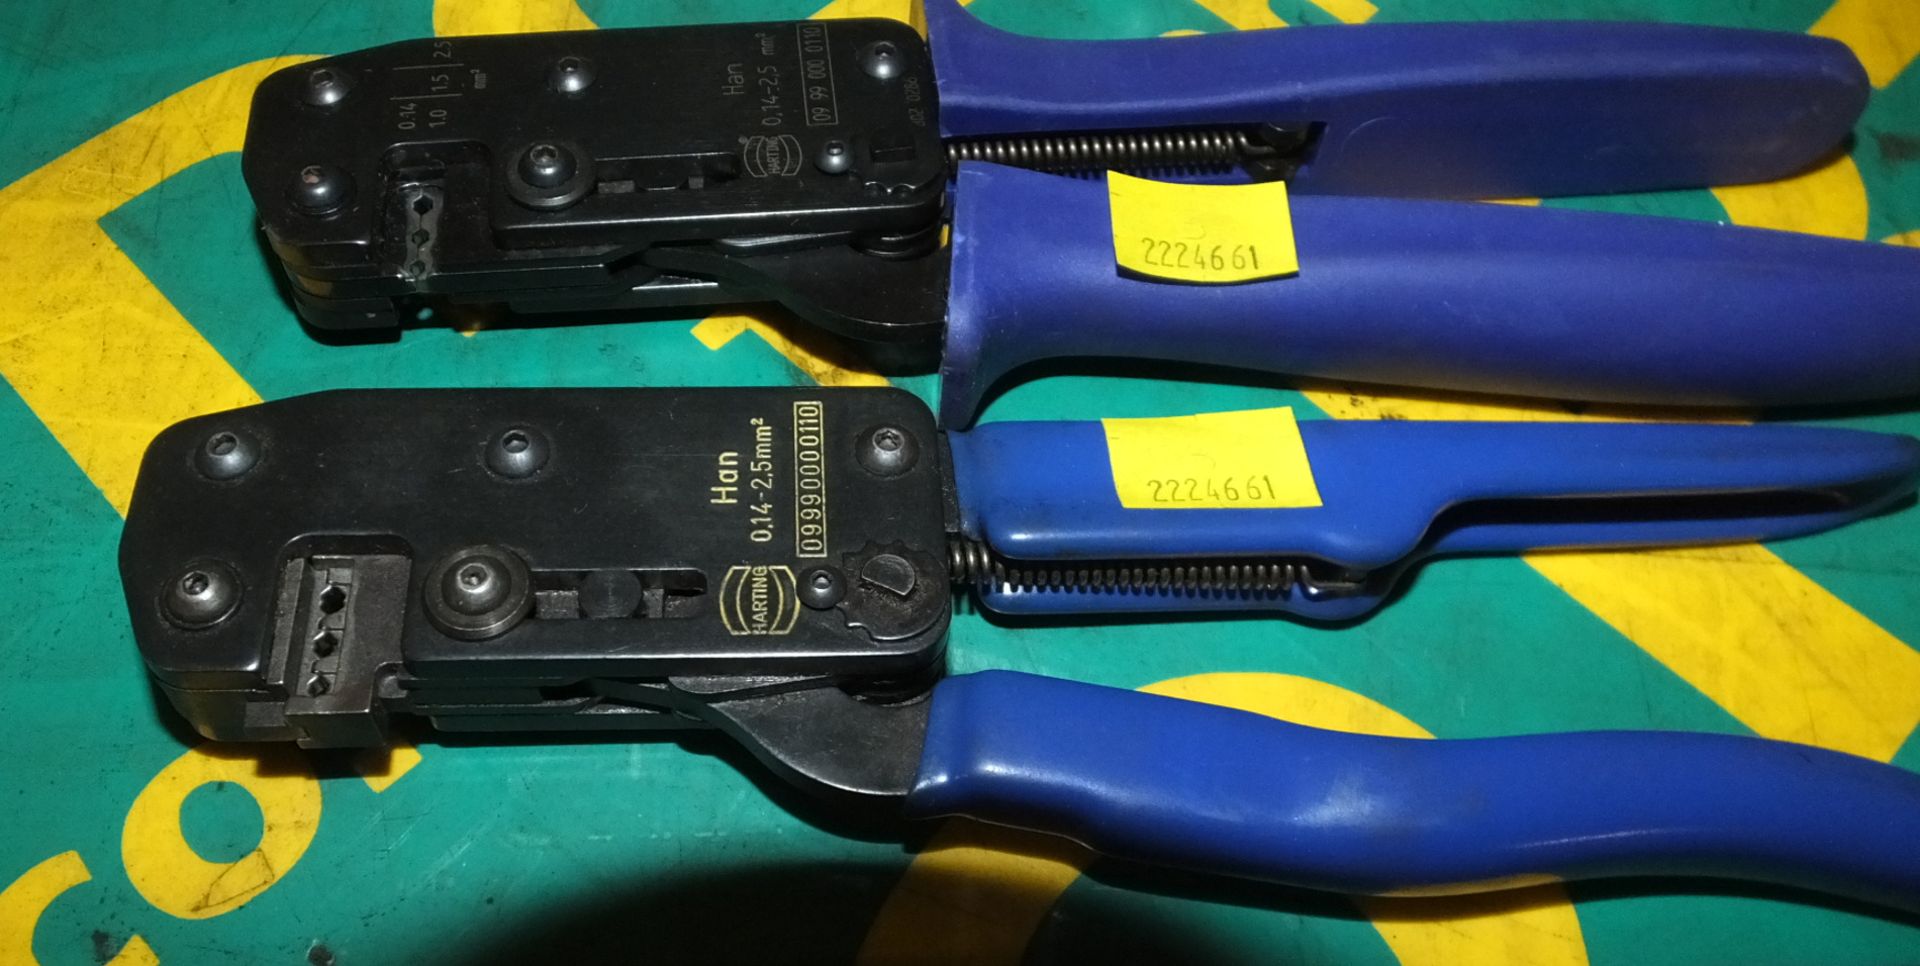 4x Harting 0,14-2,5mm Crimping Tool - Image 3 of 3